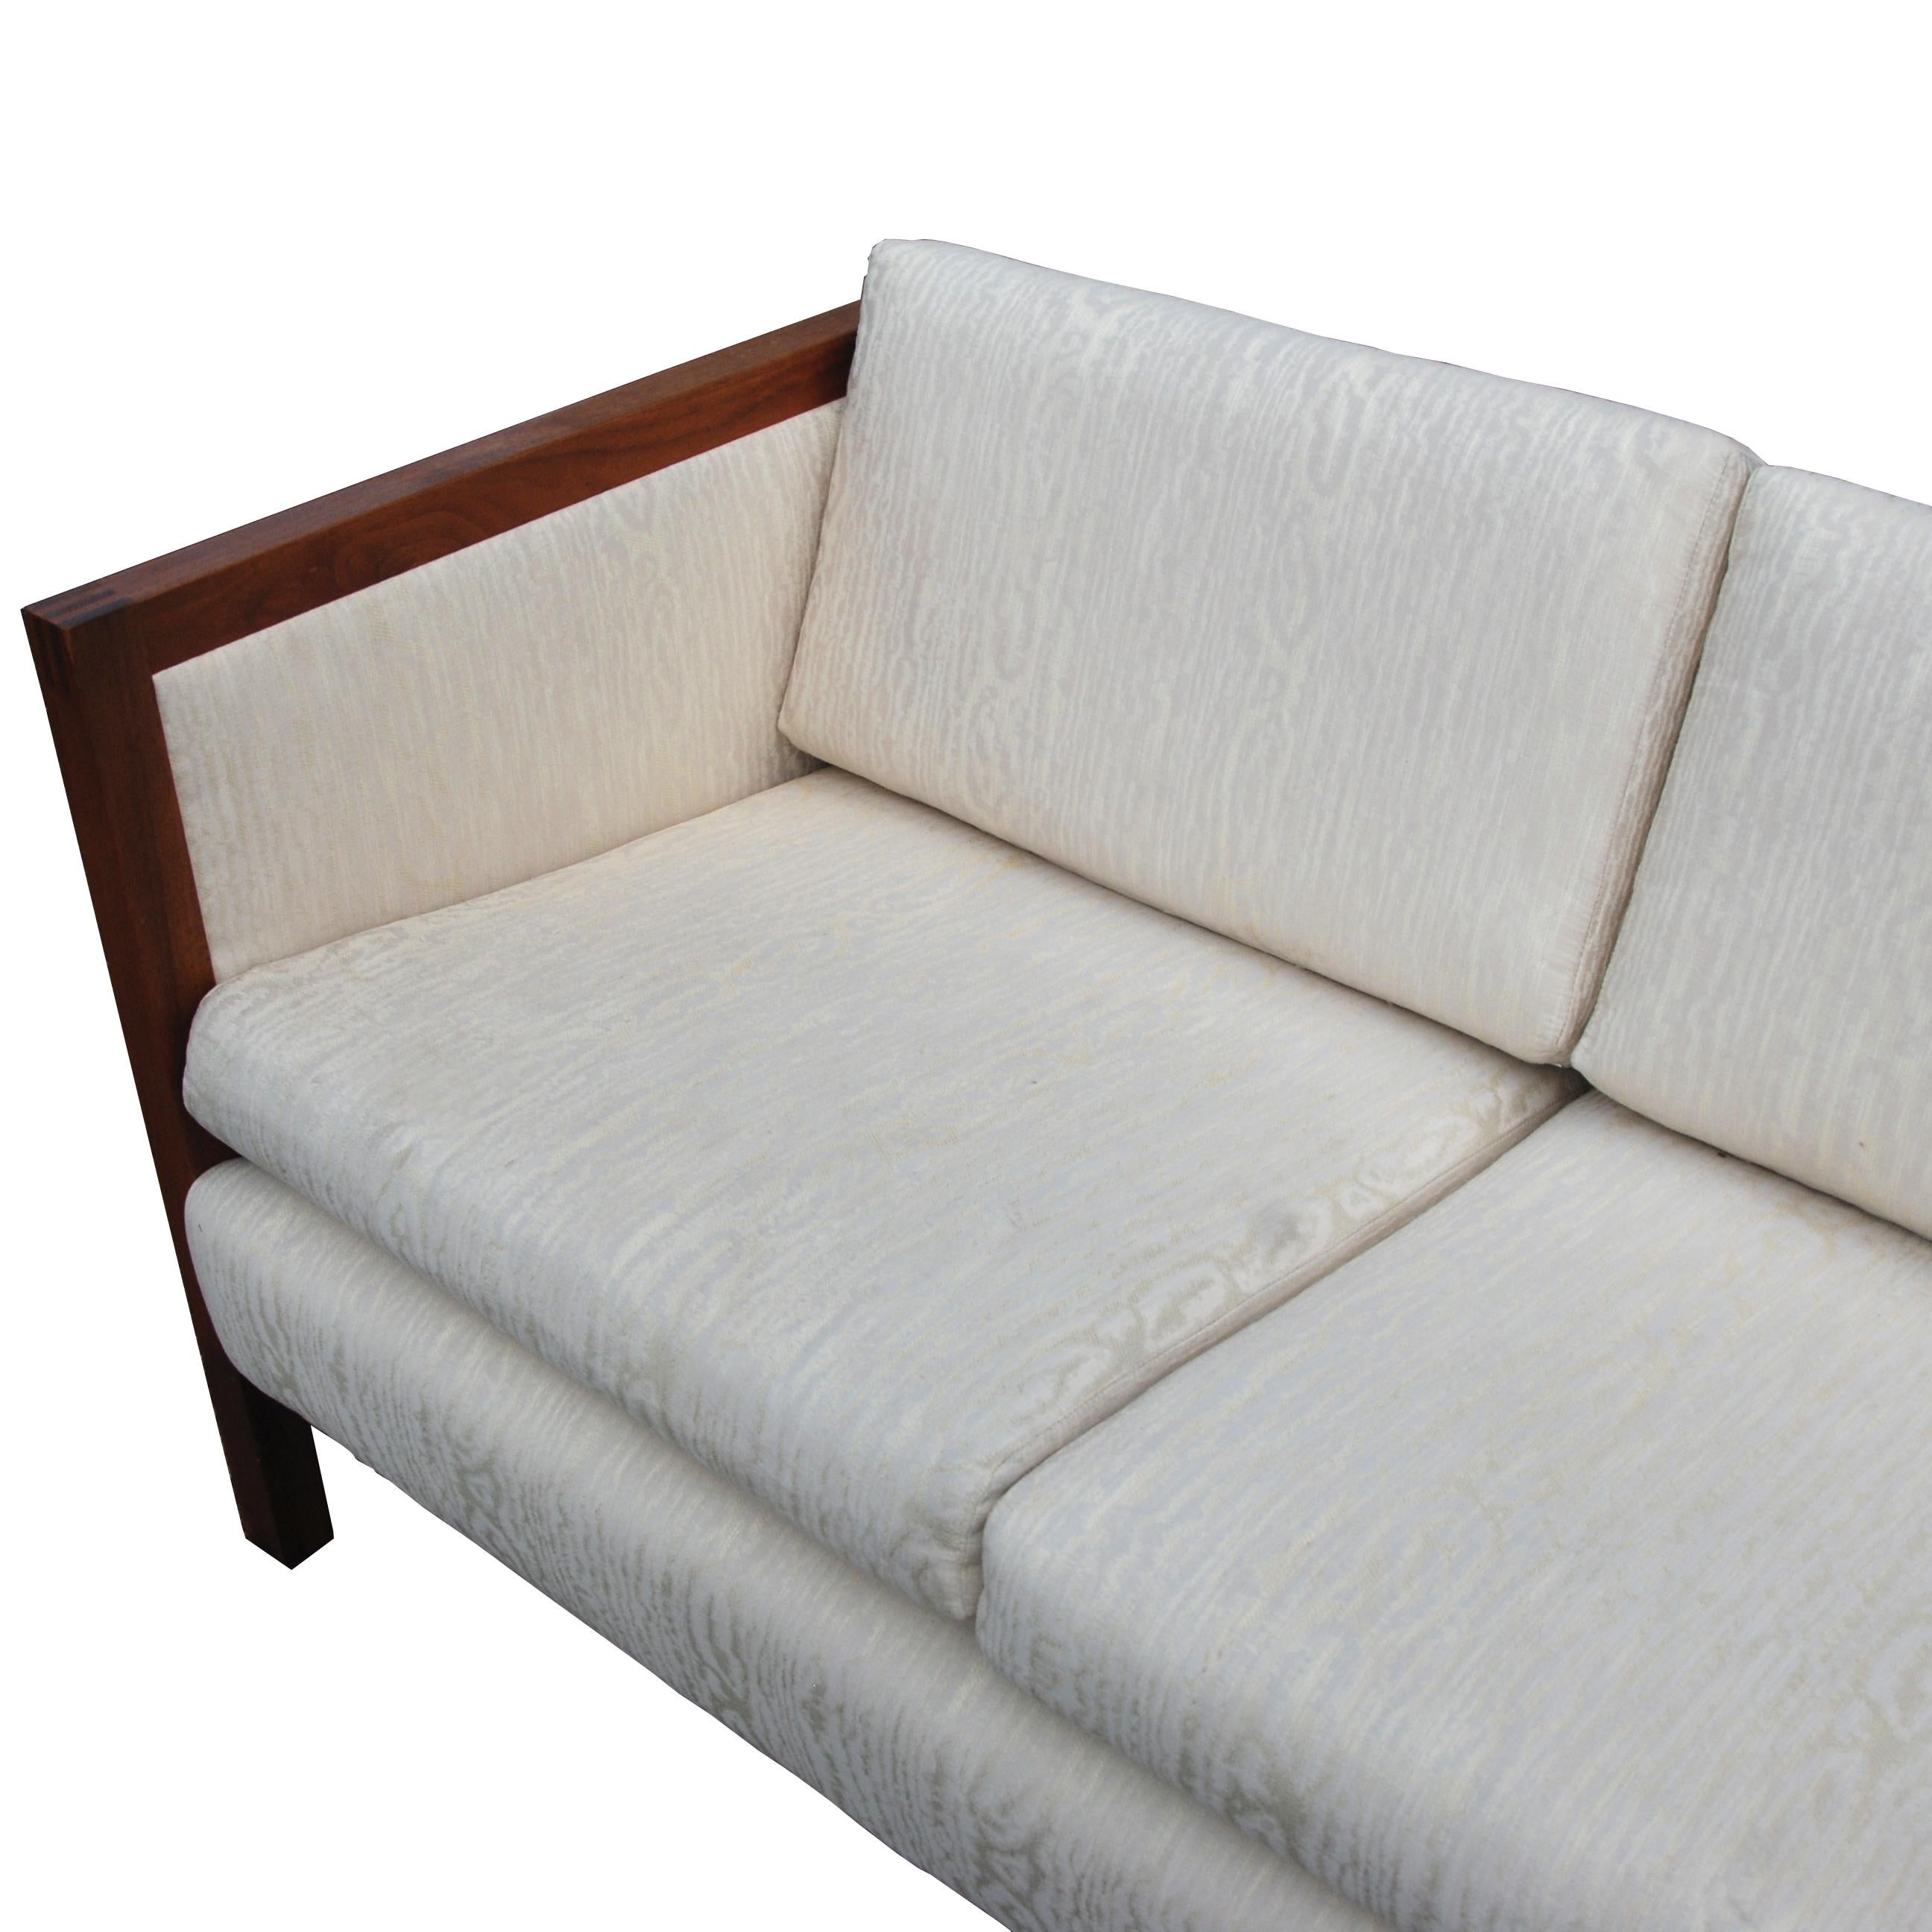 North American 6.5FT Stow Davis Sofa For Sale